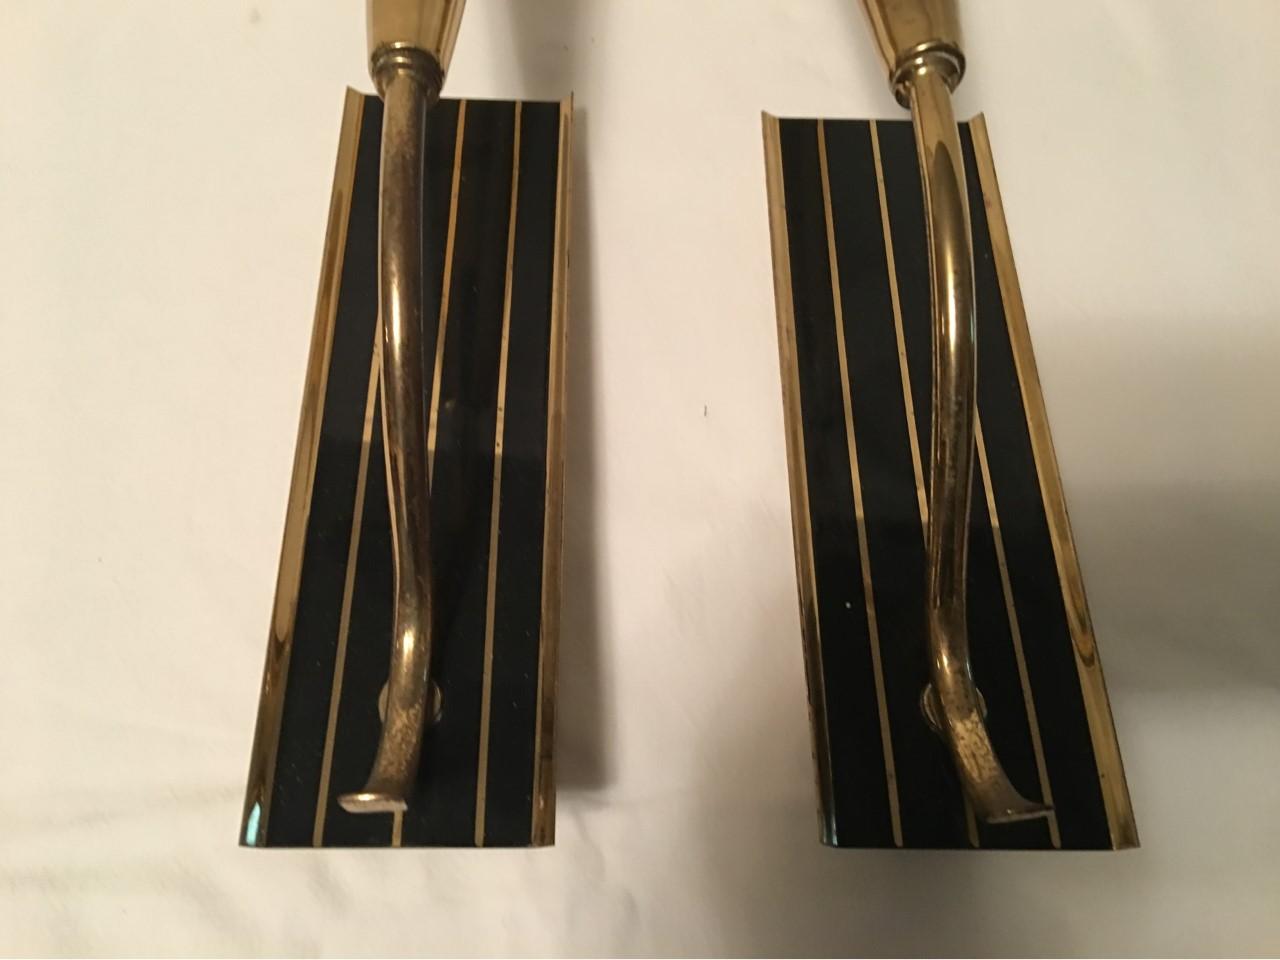 A pair of good looking 1950s Italian brass black striped sconces. The copper and clear styling form are very reminisced of the Classic Art Deco styles. Each fixture requires a European E 14 candelabra bulb up to 60 watts. In good working condition.